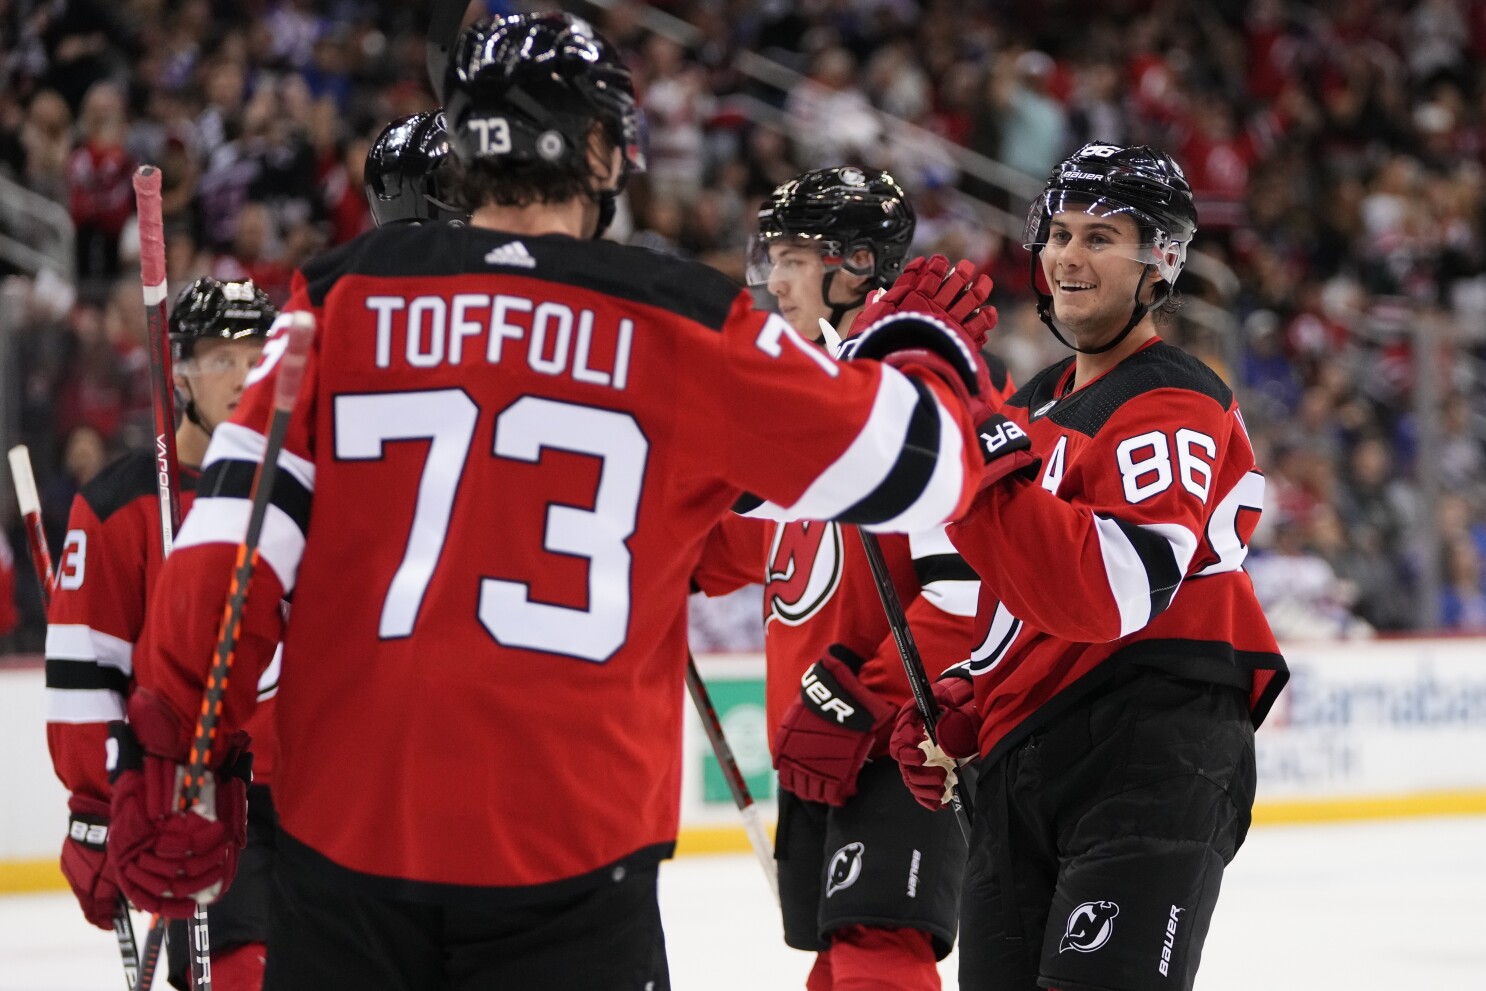 New Jersey Devils Should Add a Third Jersey